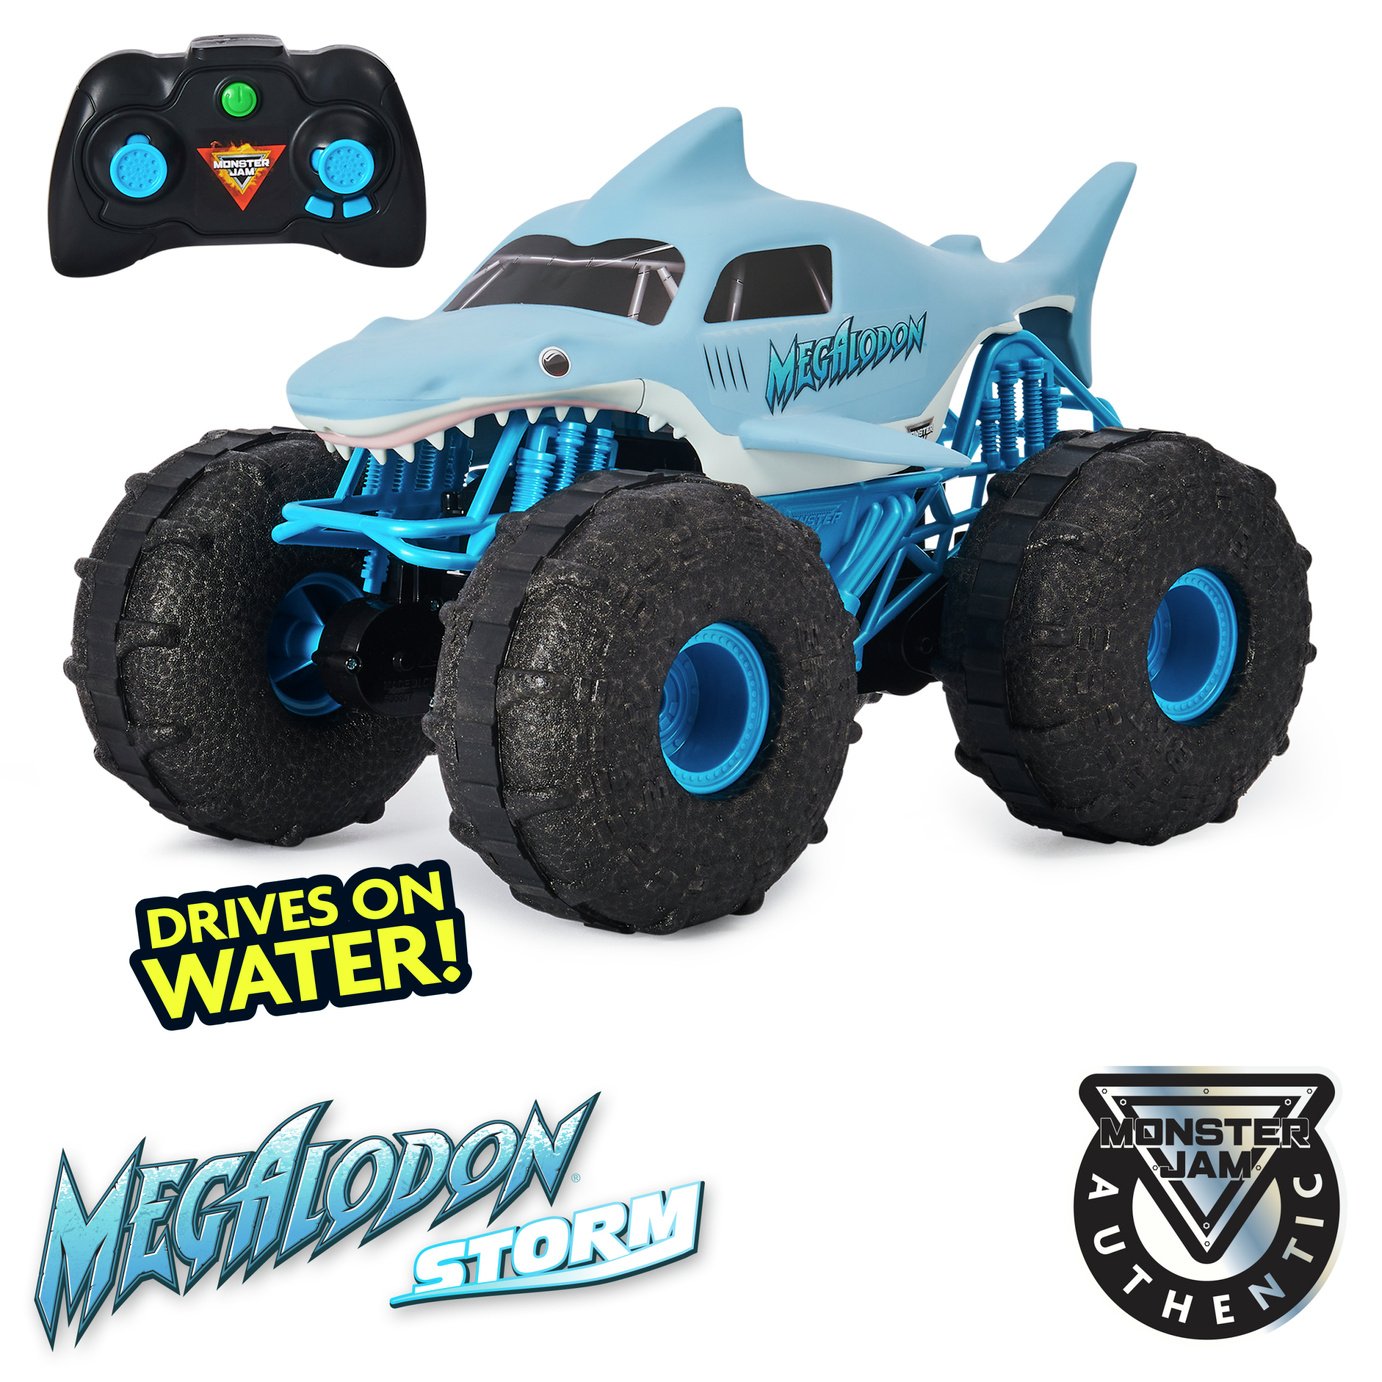 Monster Jam Megalodon Storm 1:15 Radio Controlled Truck review